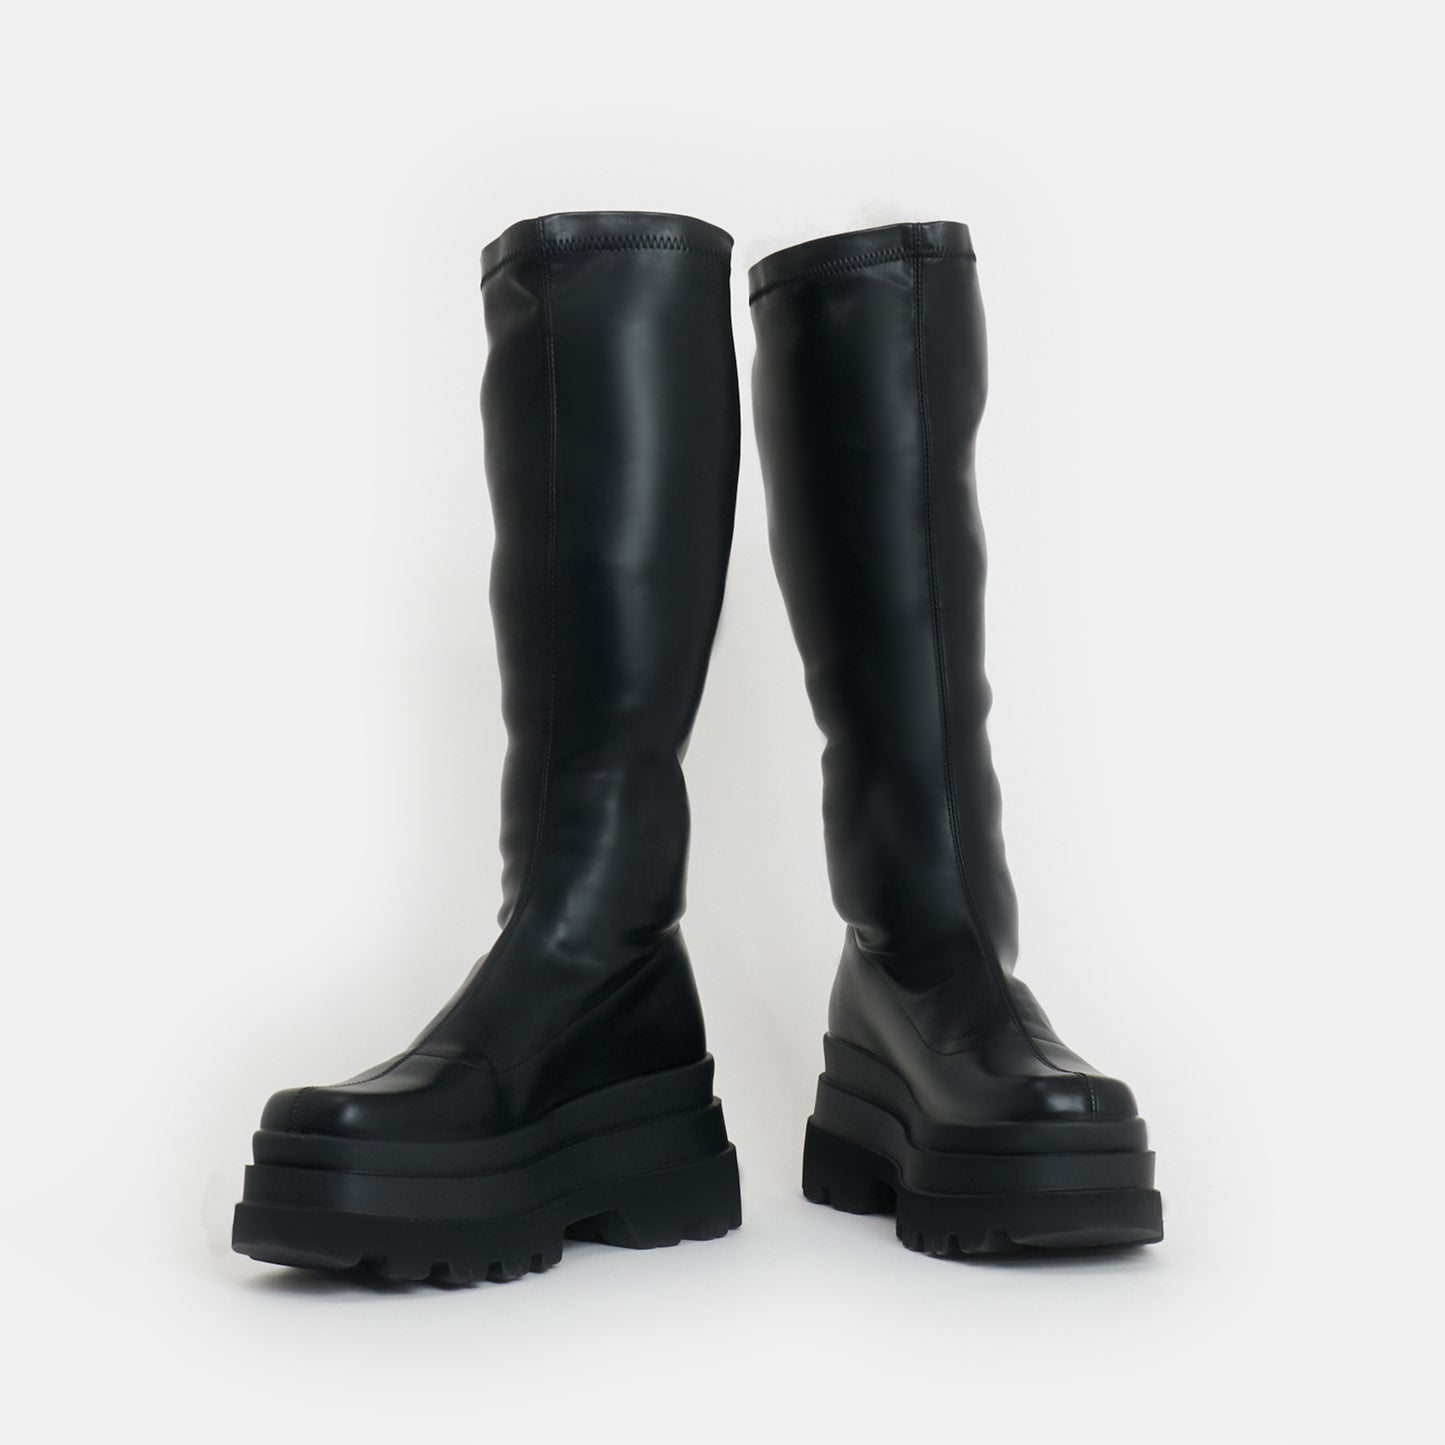 Tolan Trident Knee High Boots - Long Boots - KOI Footwear - Black - Front View